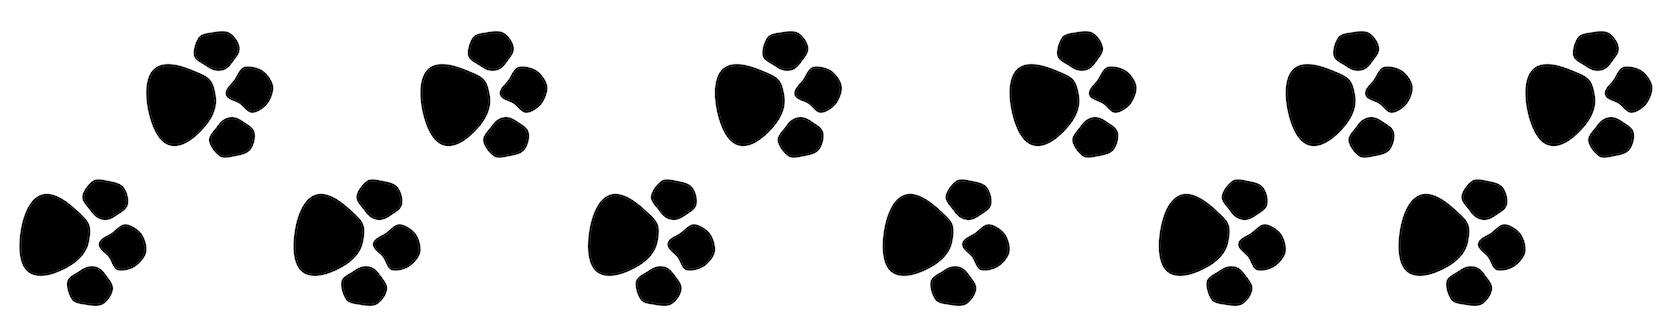 Paw Print Trail Kid Png Image Clipart